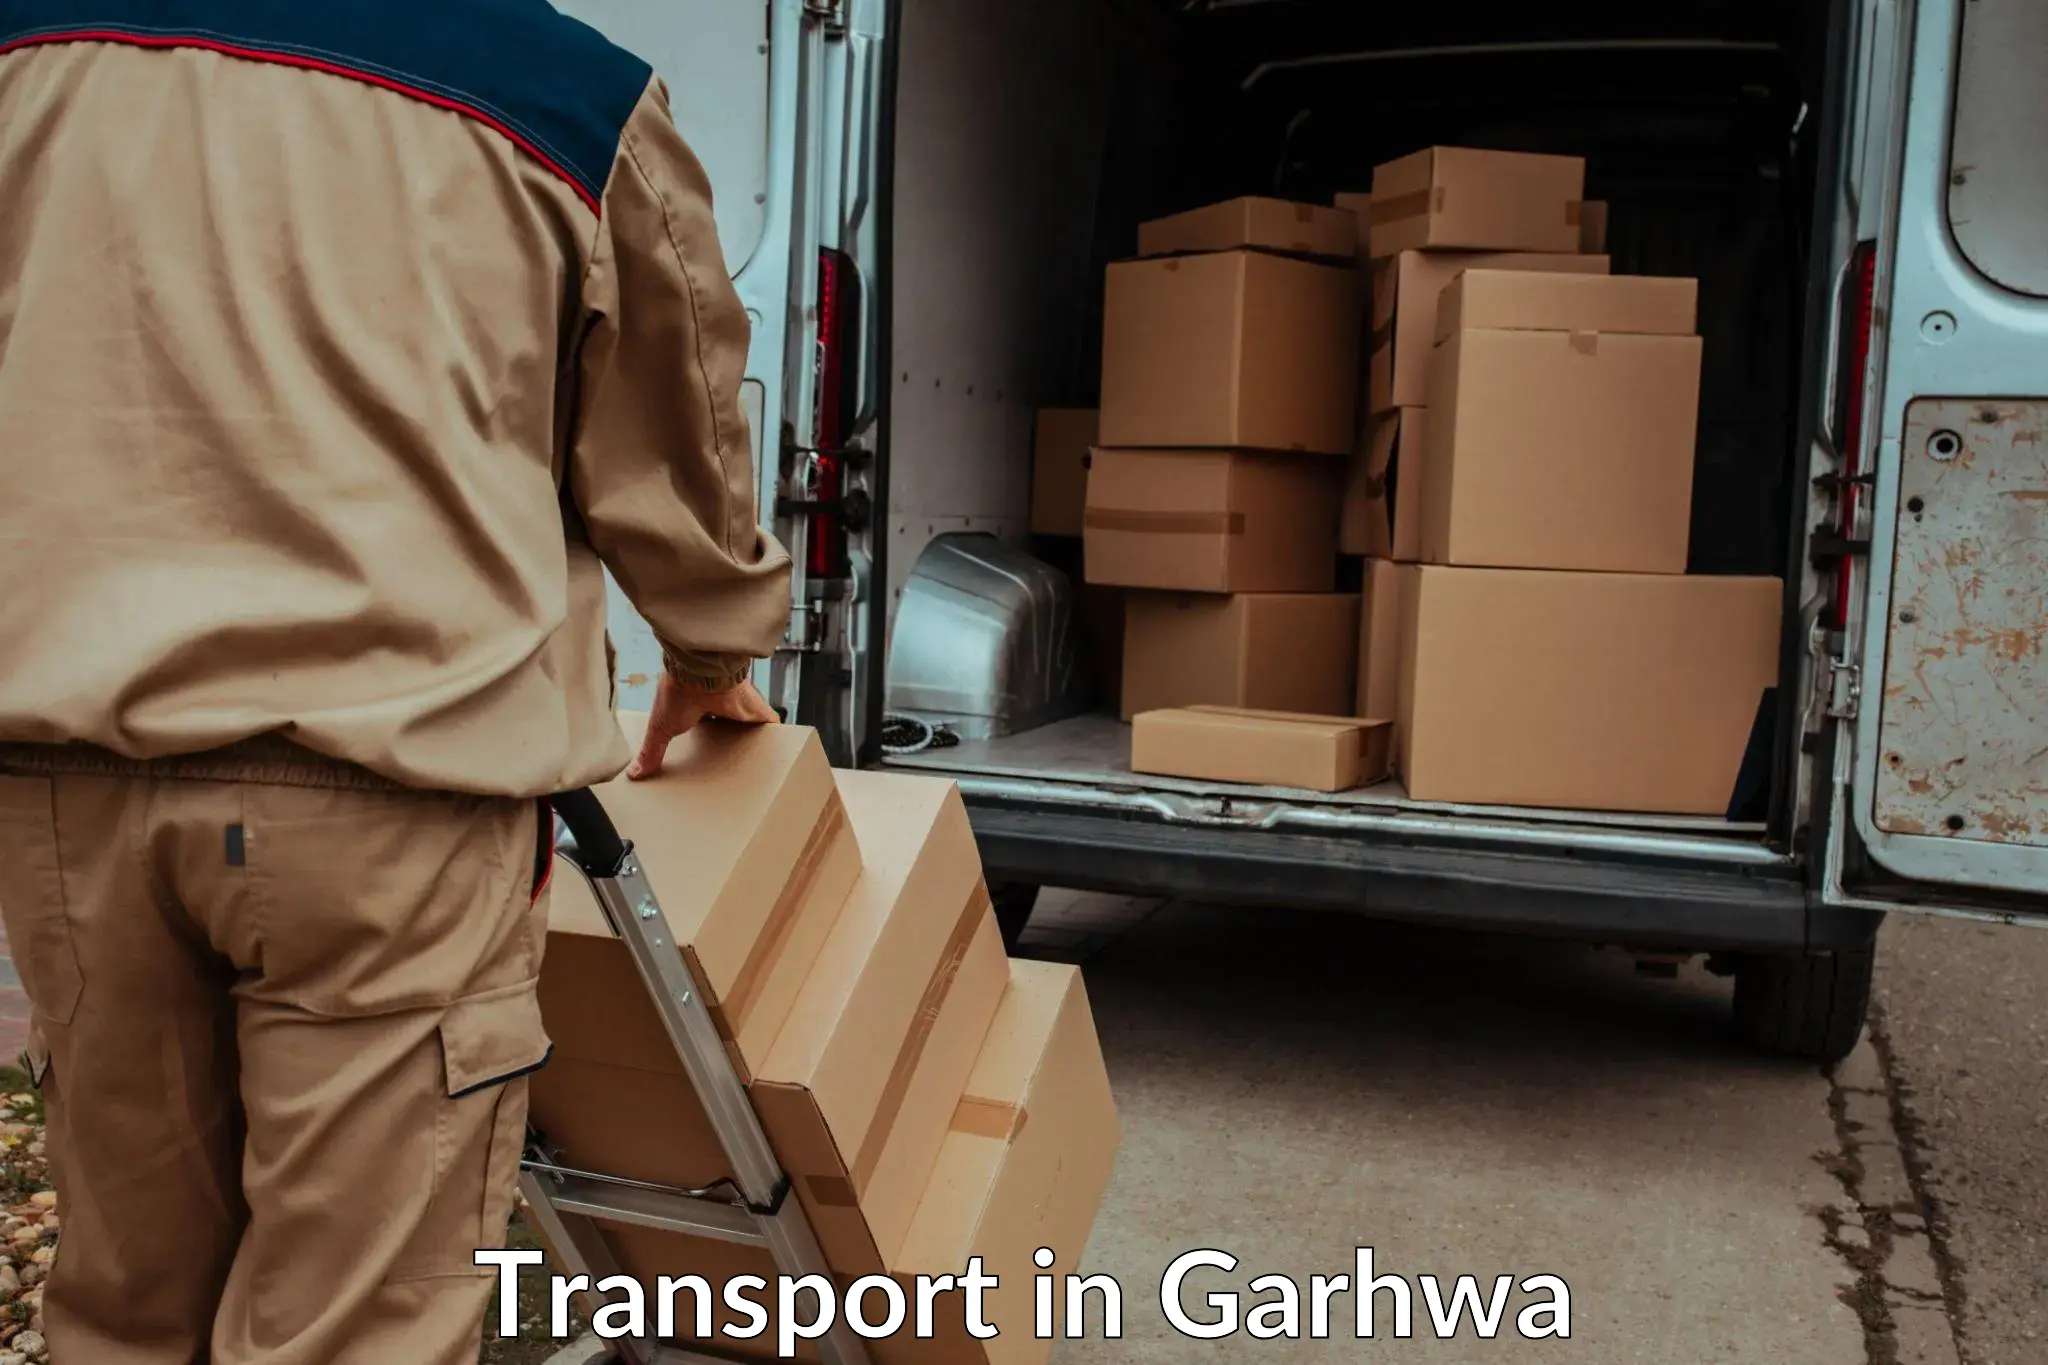 Container transportation services in Garhwa